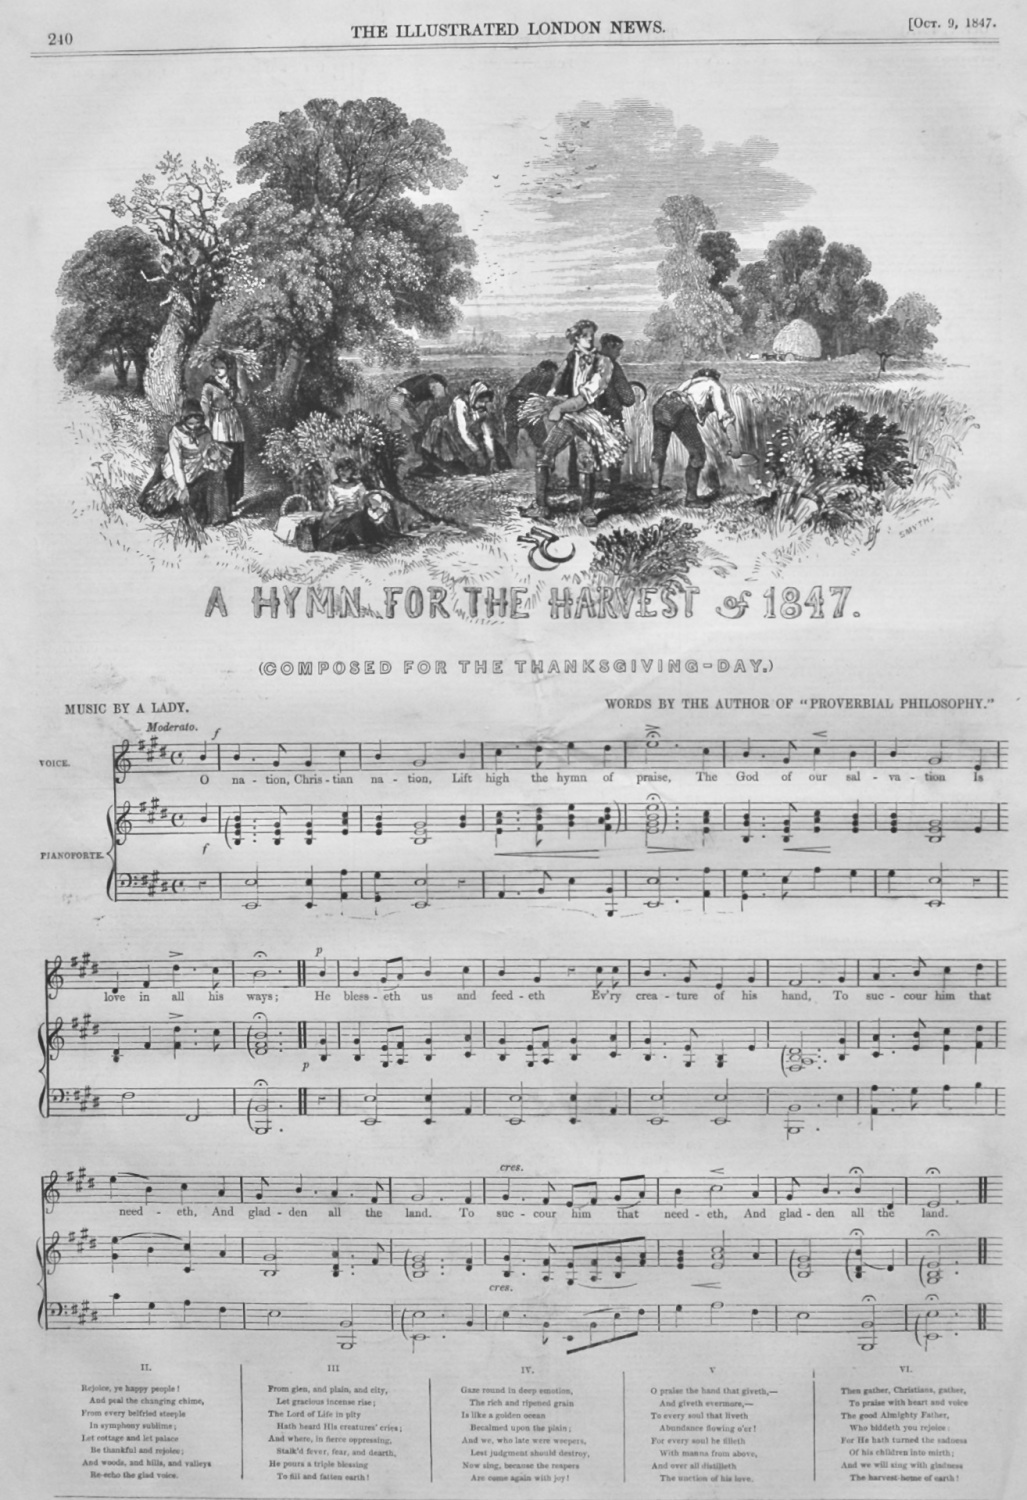 A Hymn for the Harvest of 1847.  Composed for the Thanksgiving Day. 